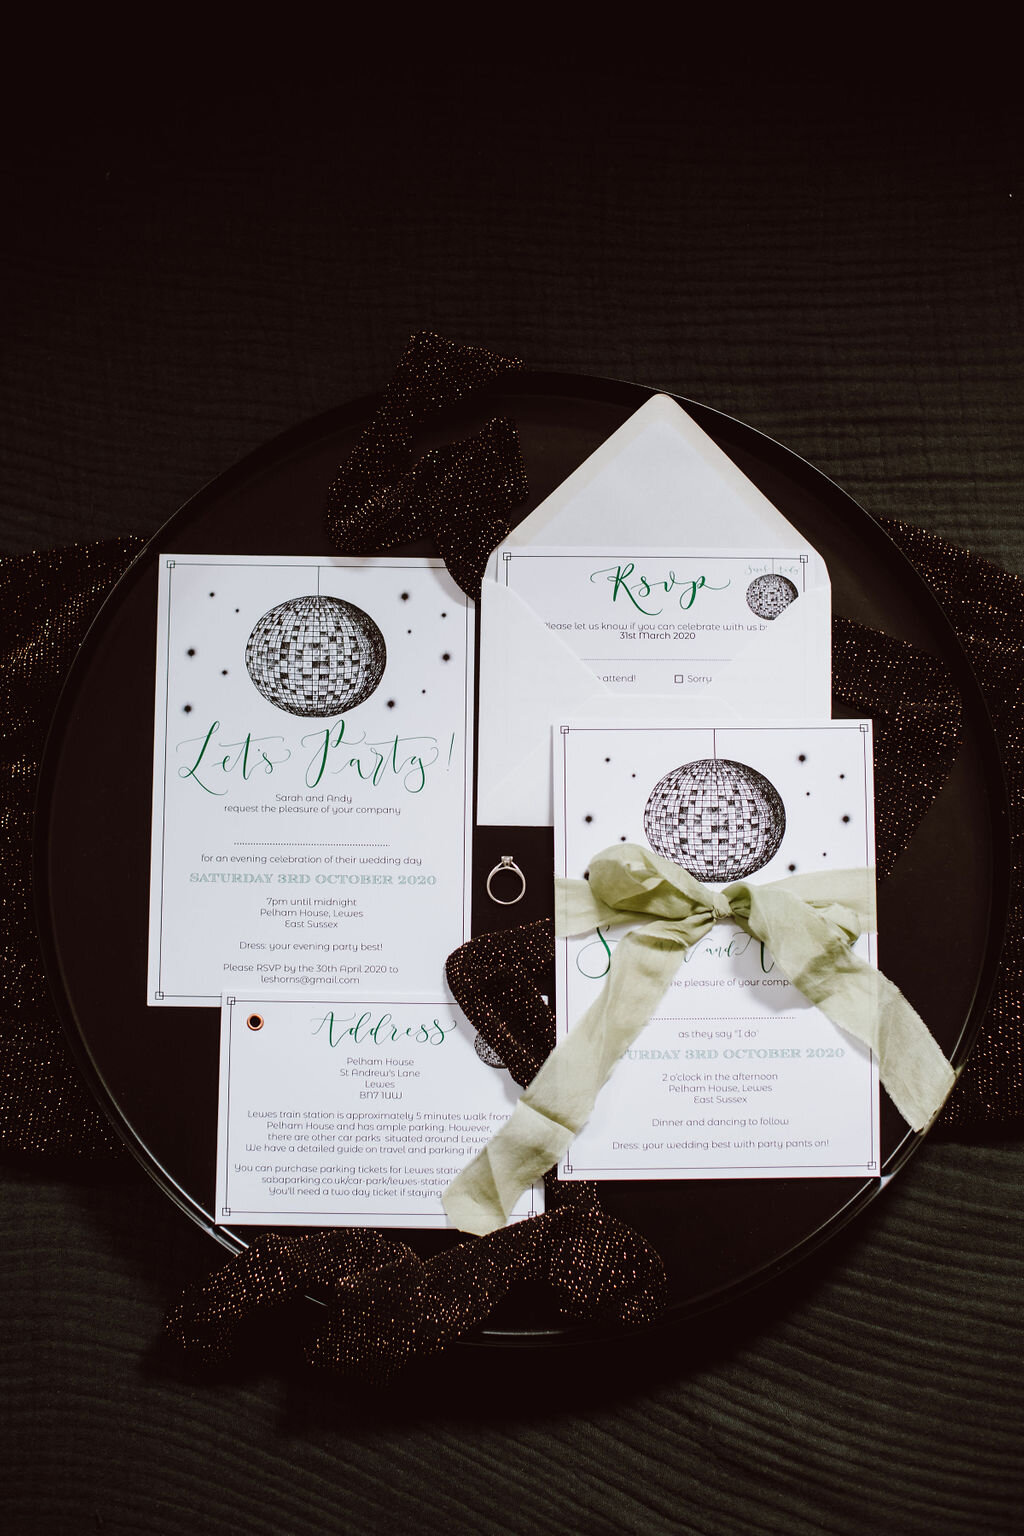 Disco ball invites -  Let's party eco friendly invitations made from recycled paper - Pelham House wedding stationery - modern wedding invite set.jpg